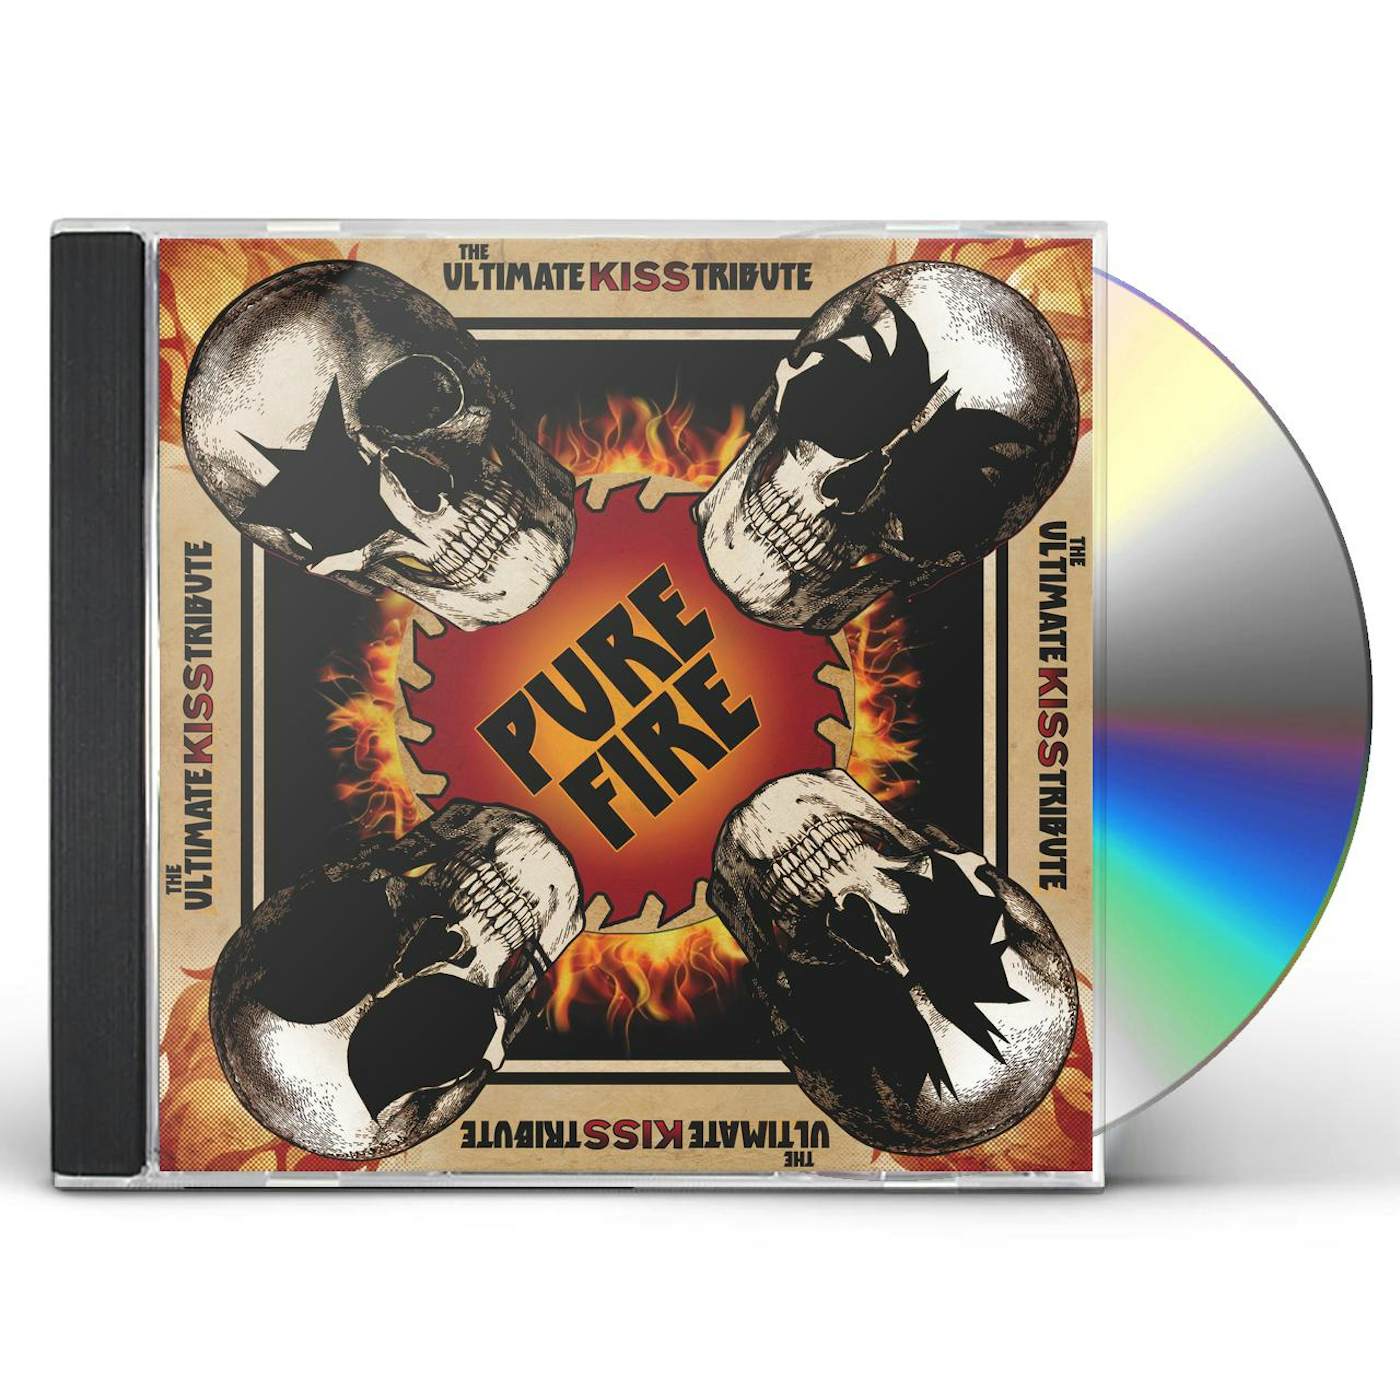 PURE FIRE - THE ULTIMATE KISS TRIBUTE / VARIOUS CD